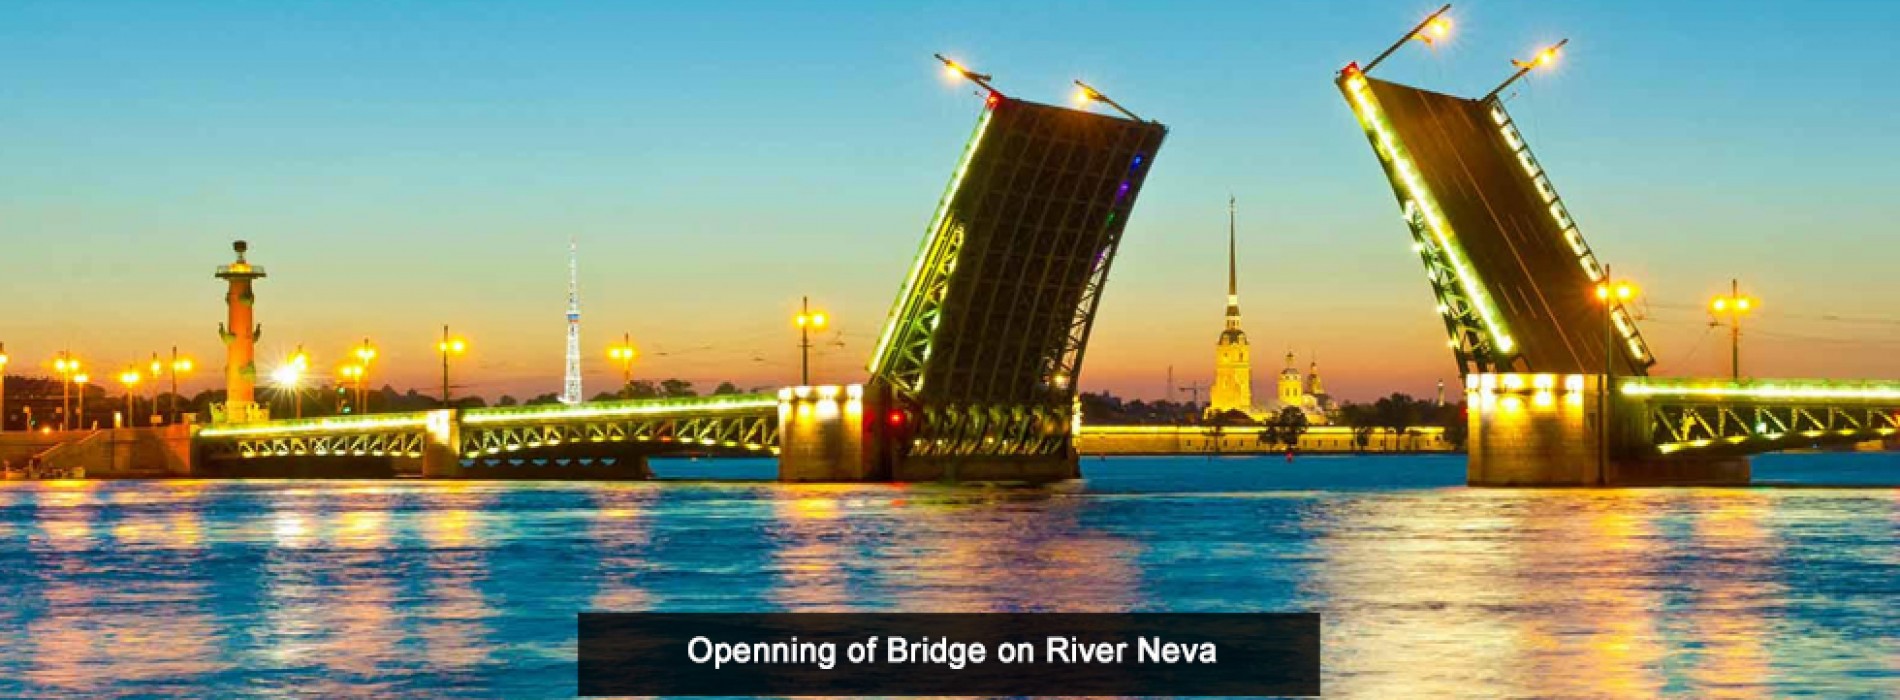 St. Petersburg showcase on 50th anniversary of sister-city tie-up with Mumbai